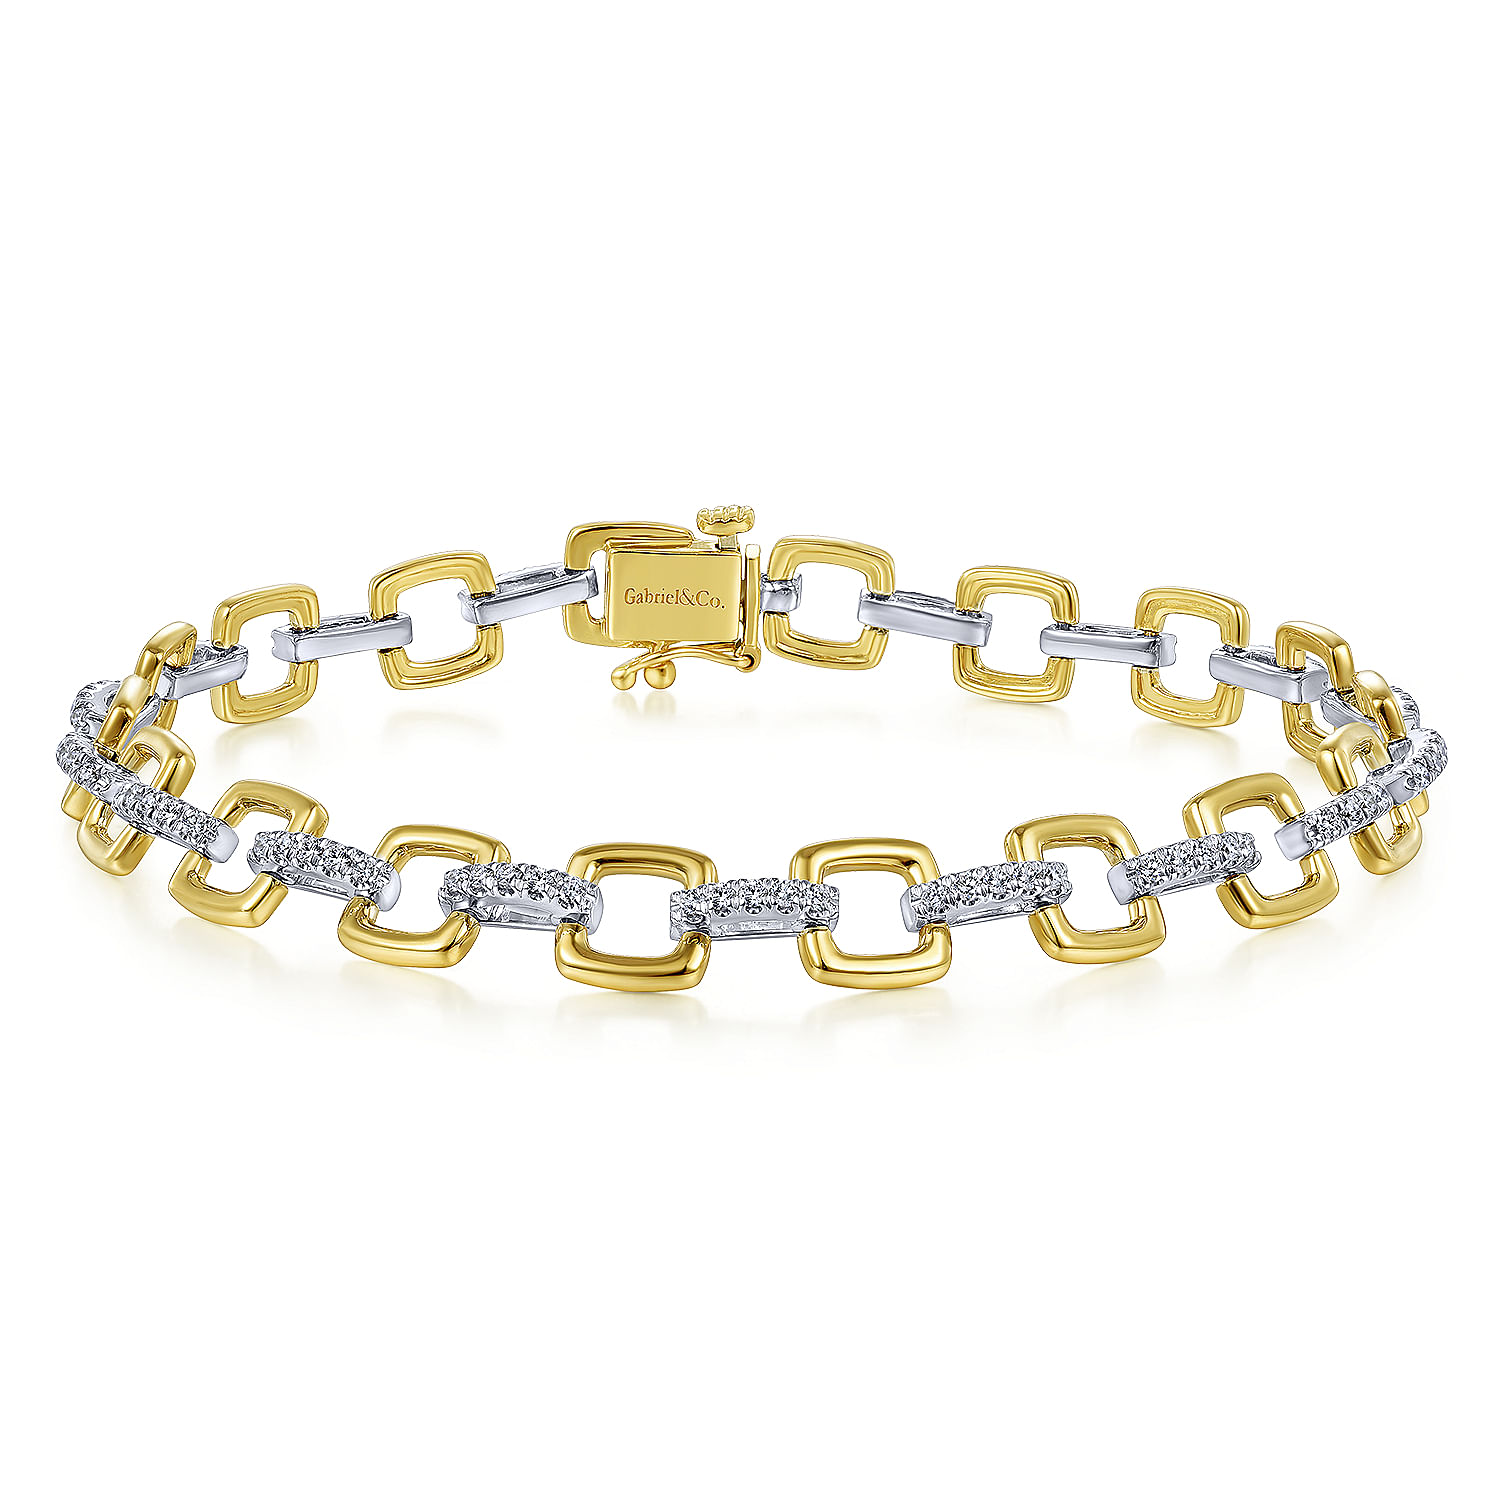 14K Yellow and White Gold Square Link Tennis Bracelet with Diamond Link Connectors